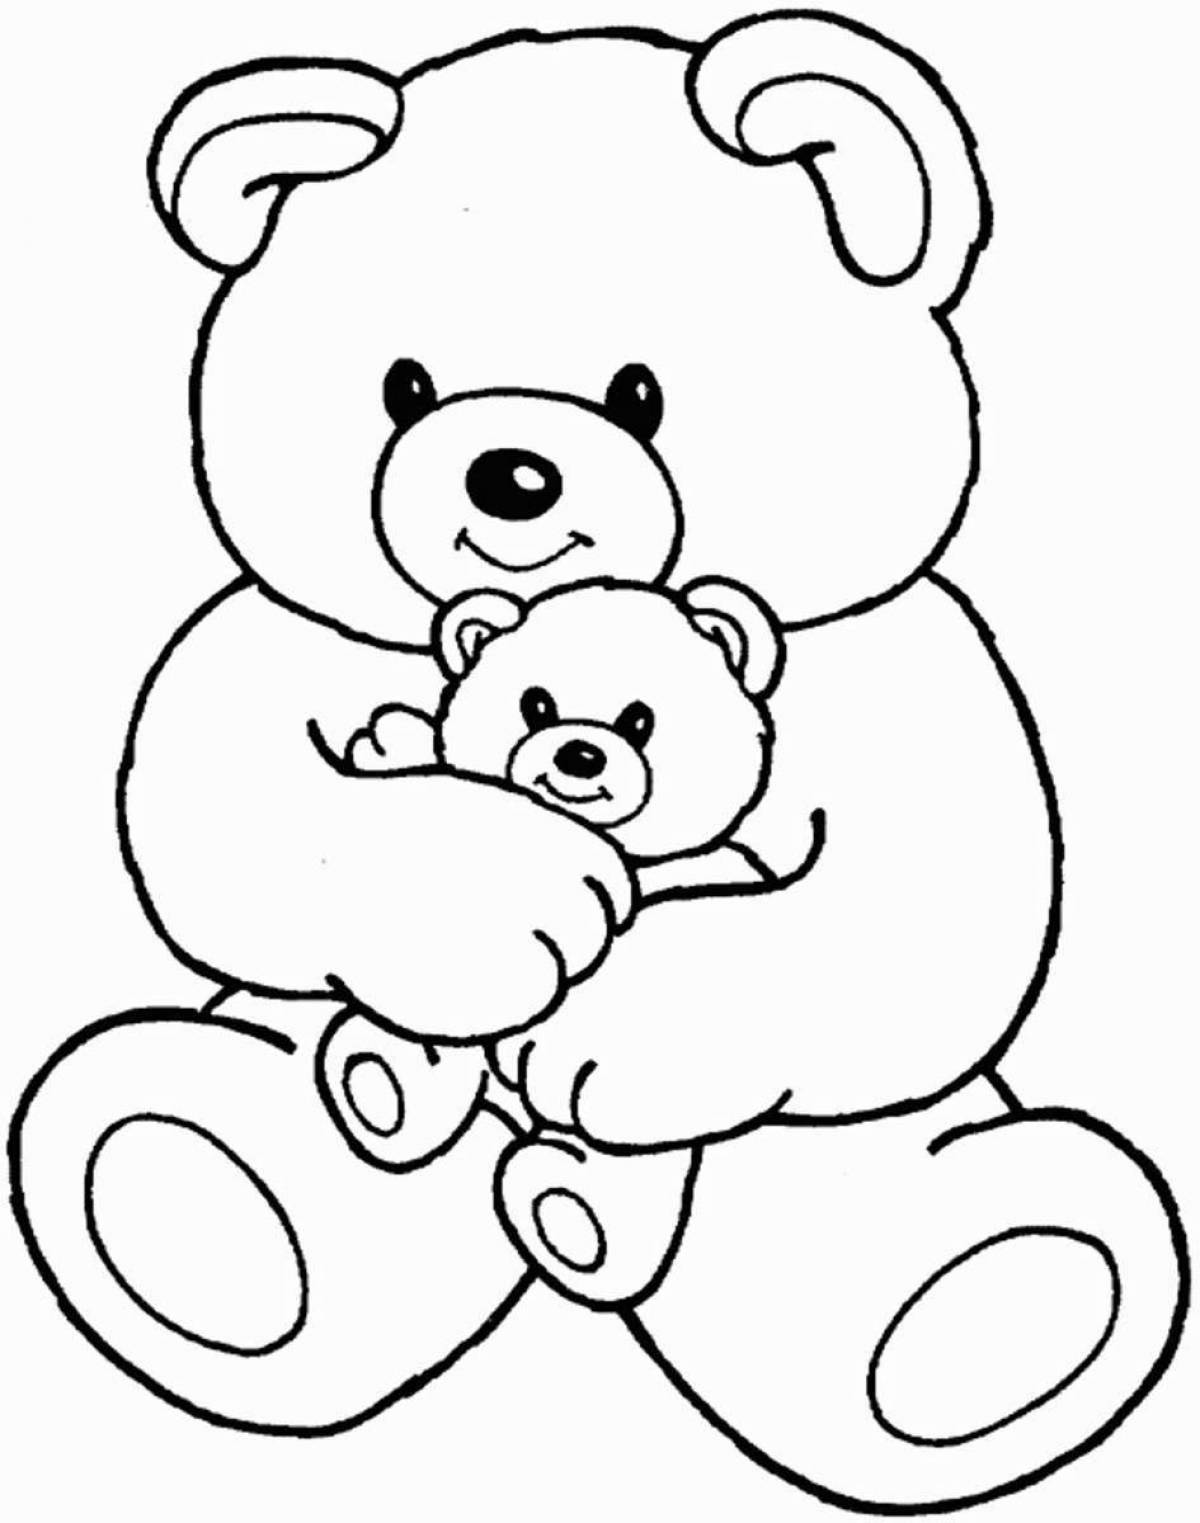 Colorful bear coloring book for children 6-7 years old